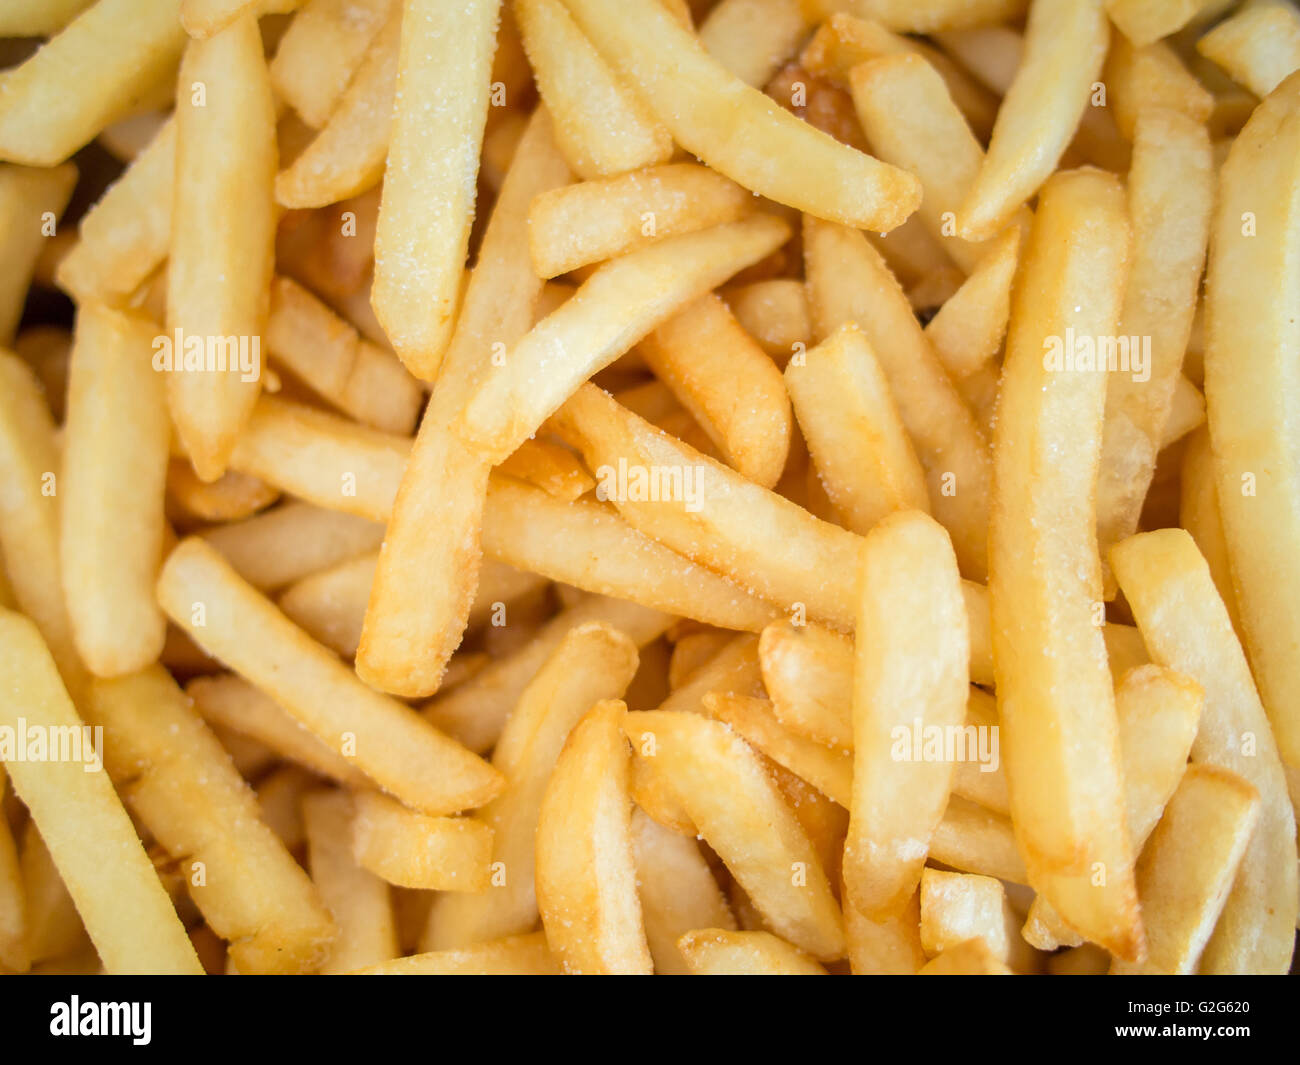 potato chips as a background Stock Photo